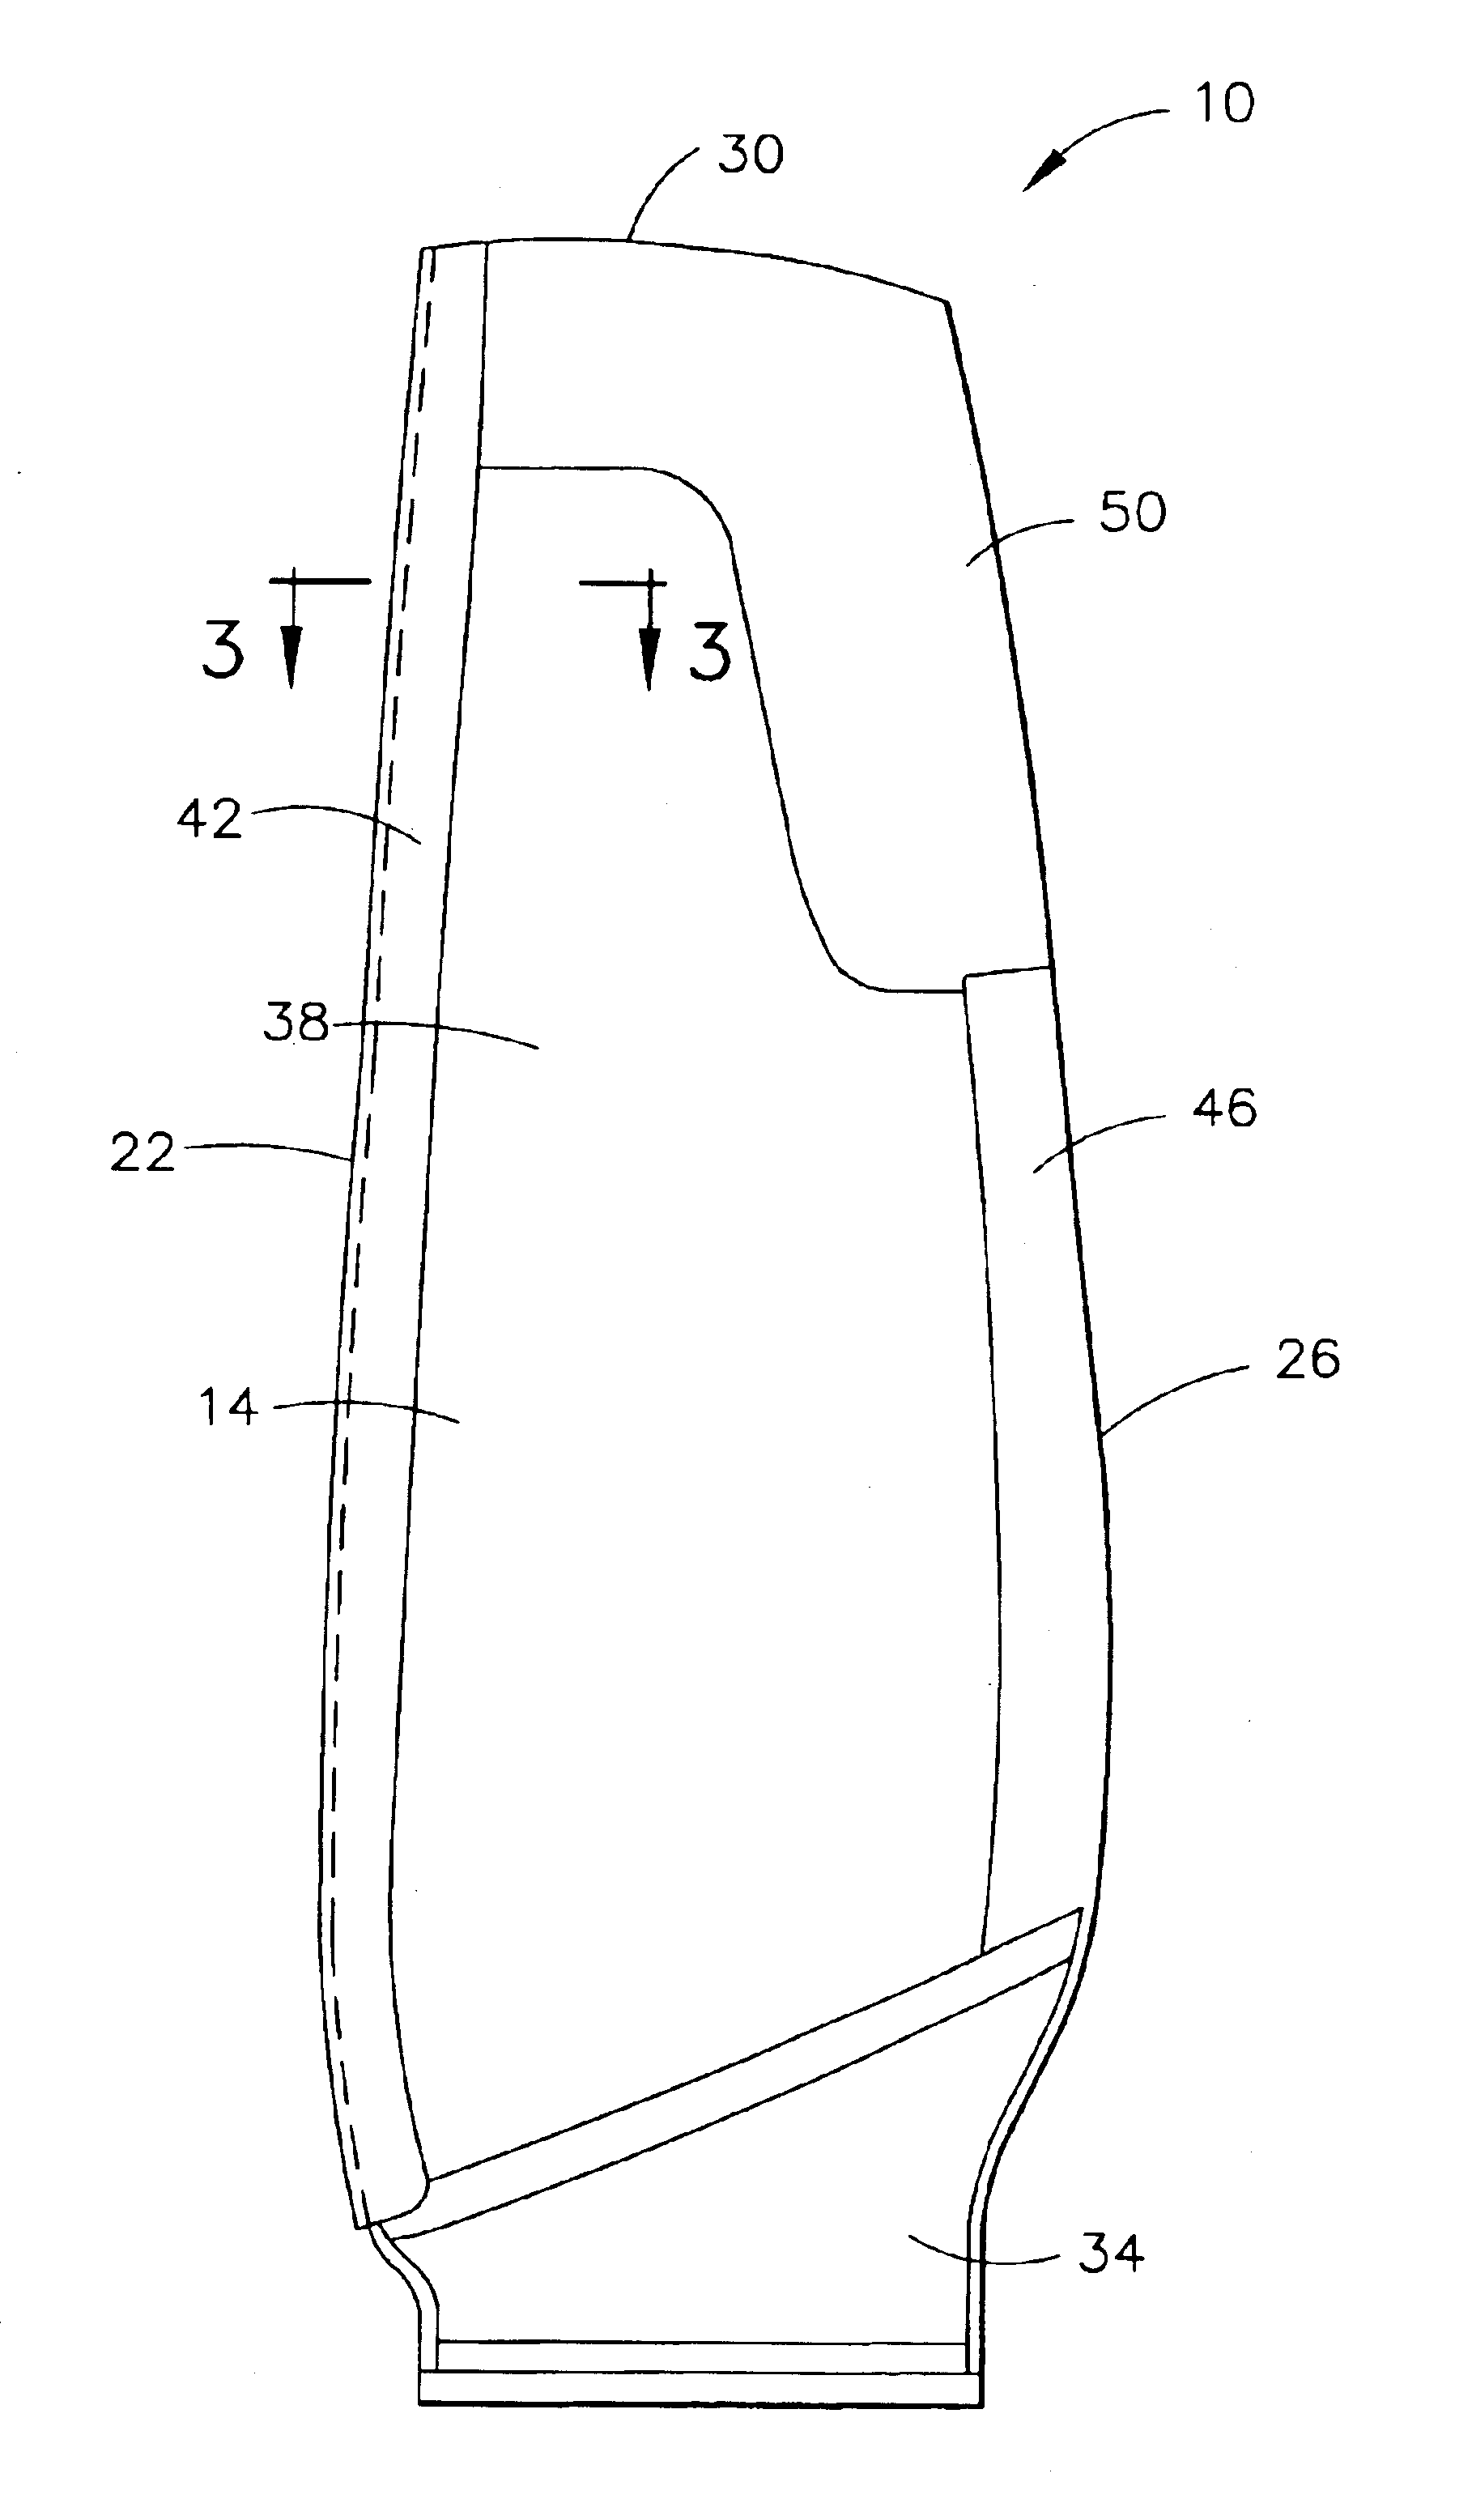 Method for removing metal cladding from airfoil substrate